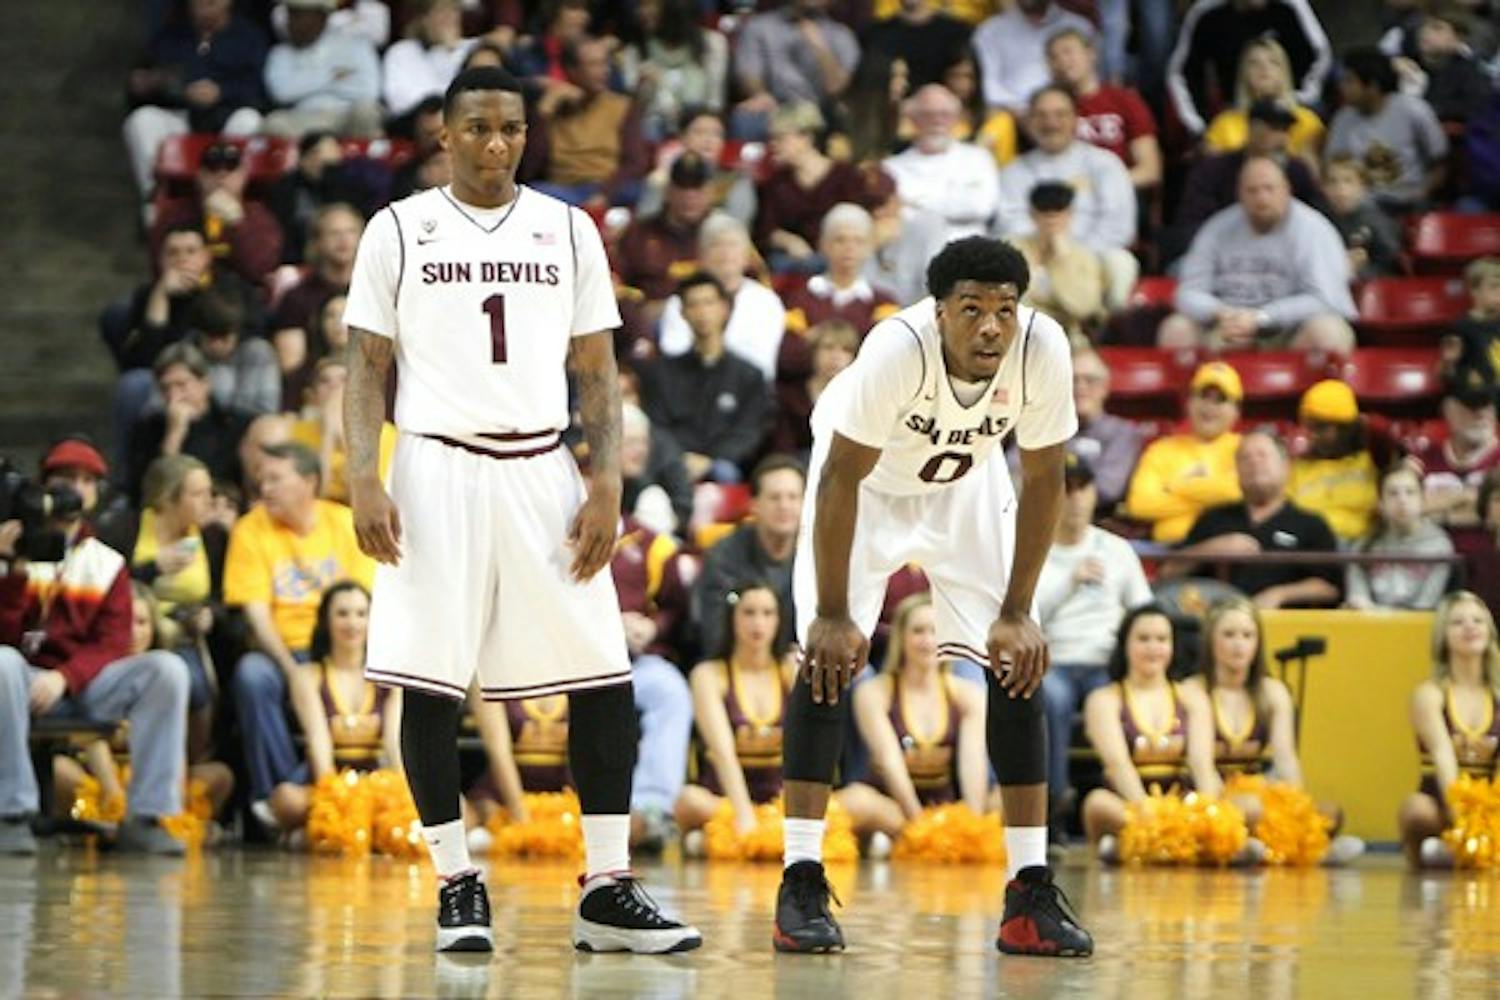 Carson and Felix catch a breath during a break in the action against Stanford on Feb. 10. (Photo by Samuel Rosenbaum)